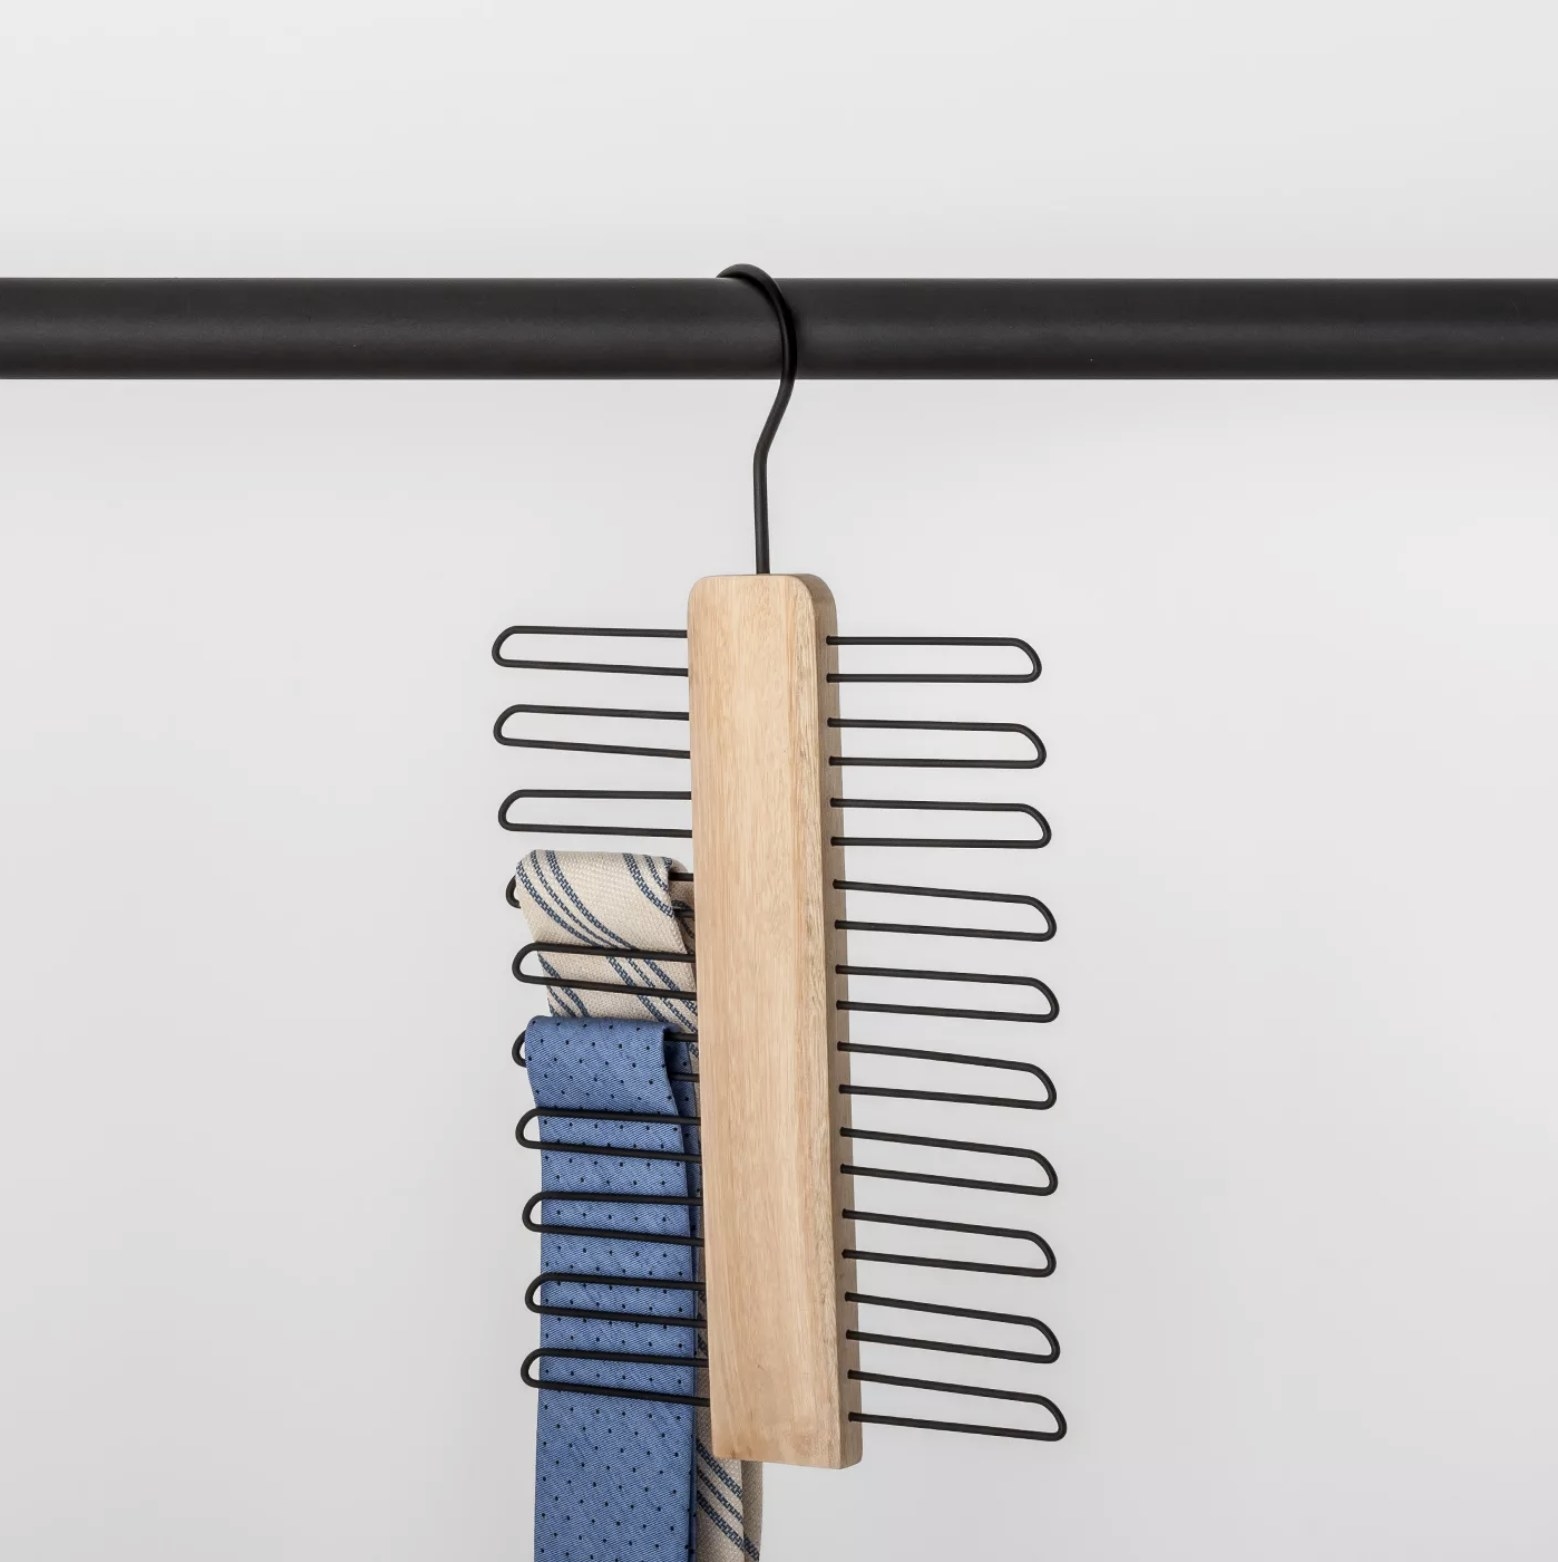 The wood and metal tie organizer 